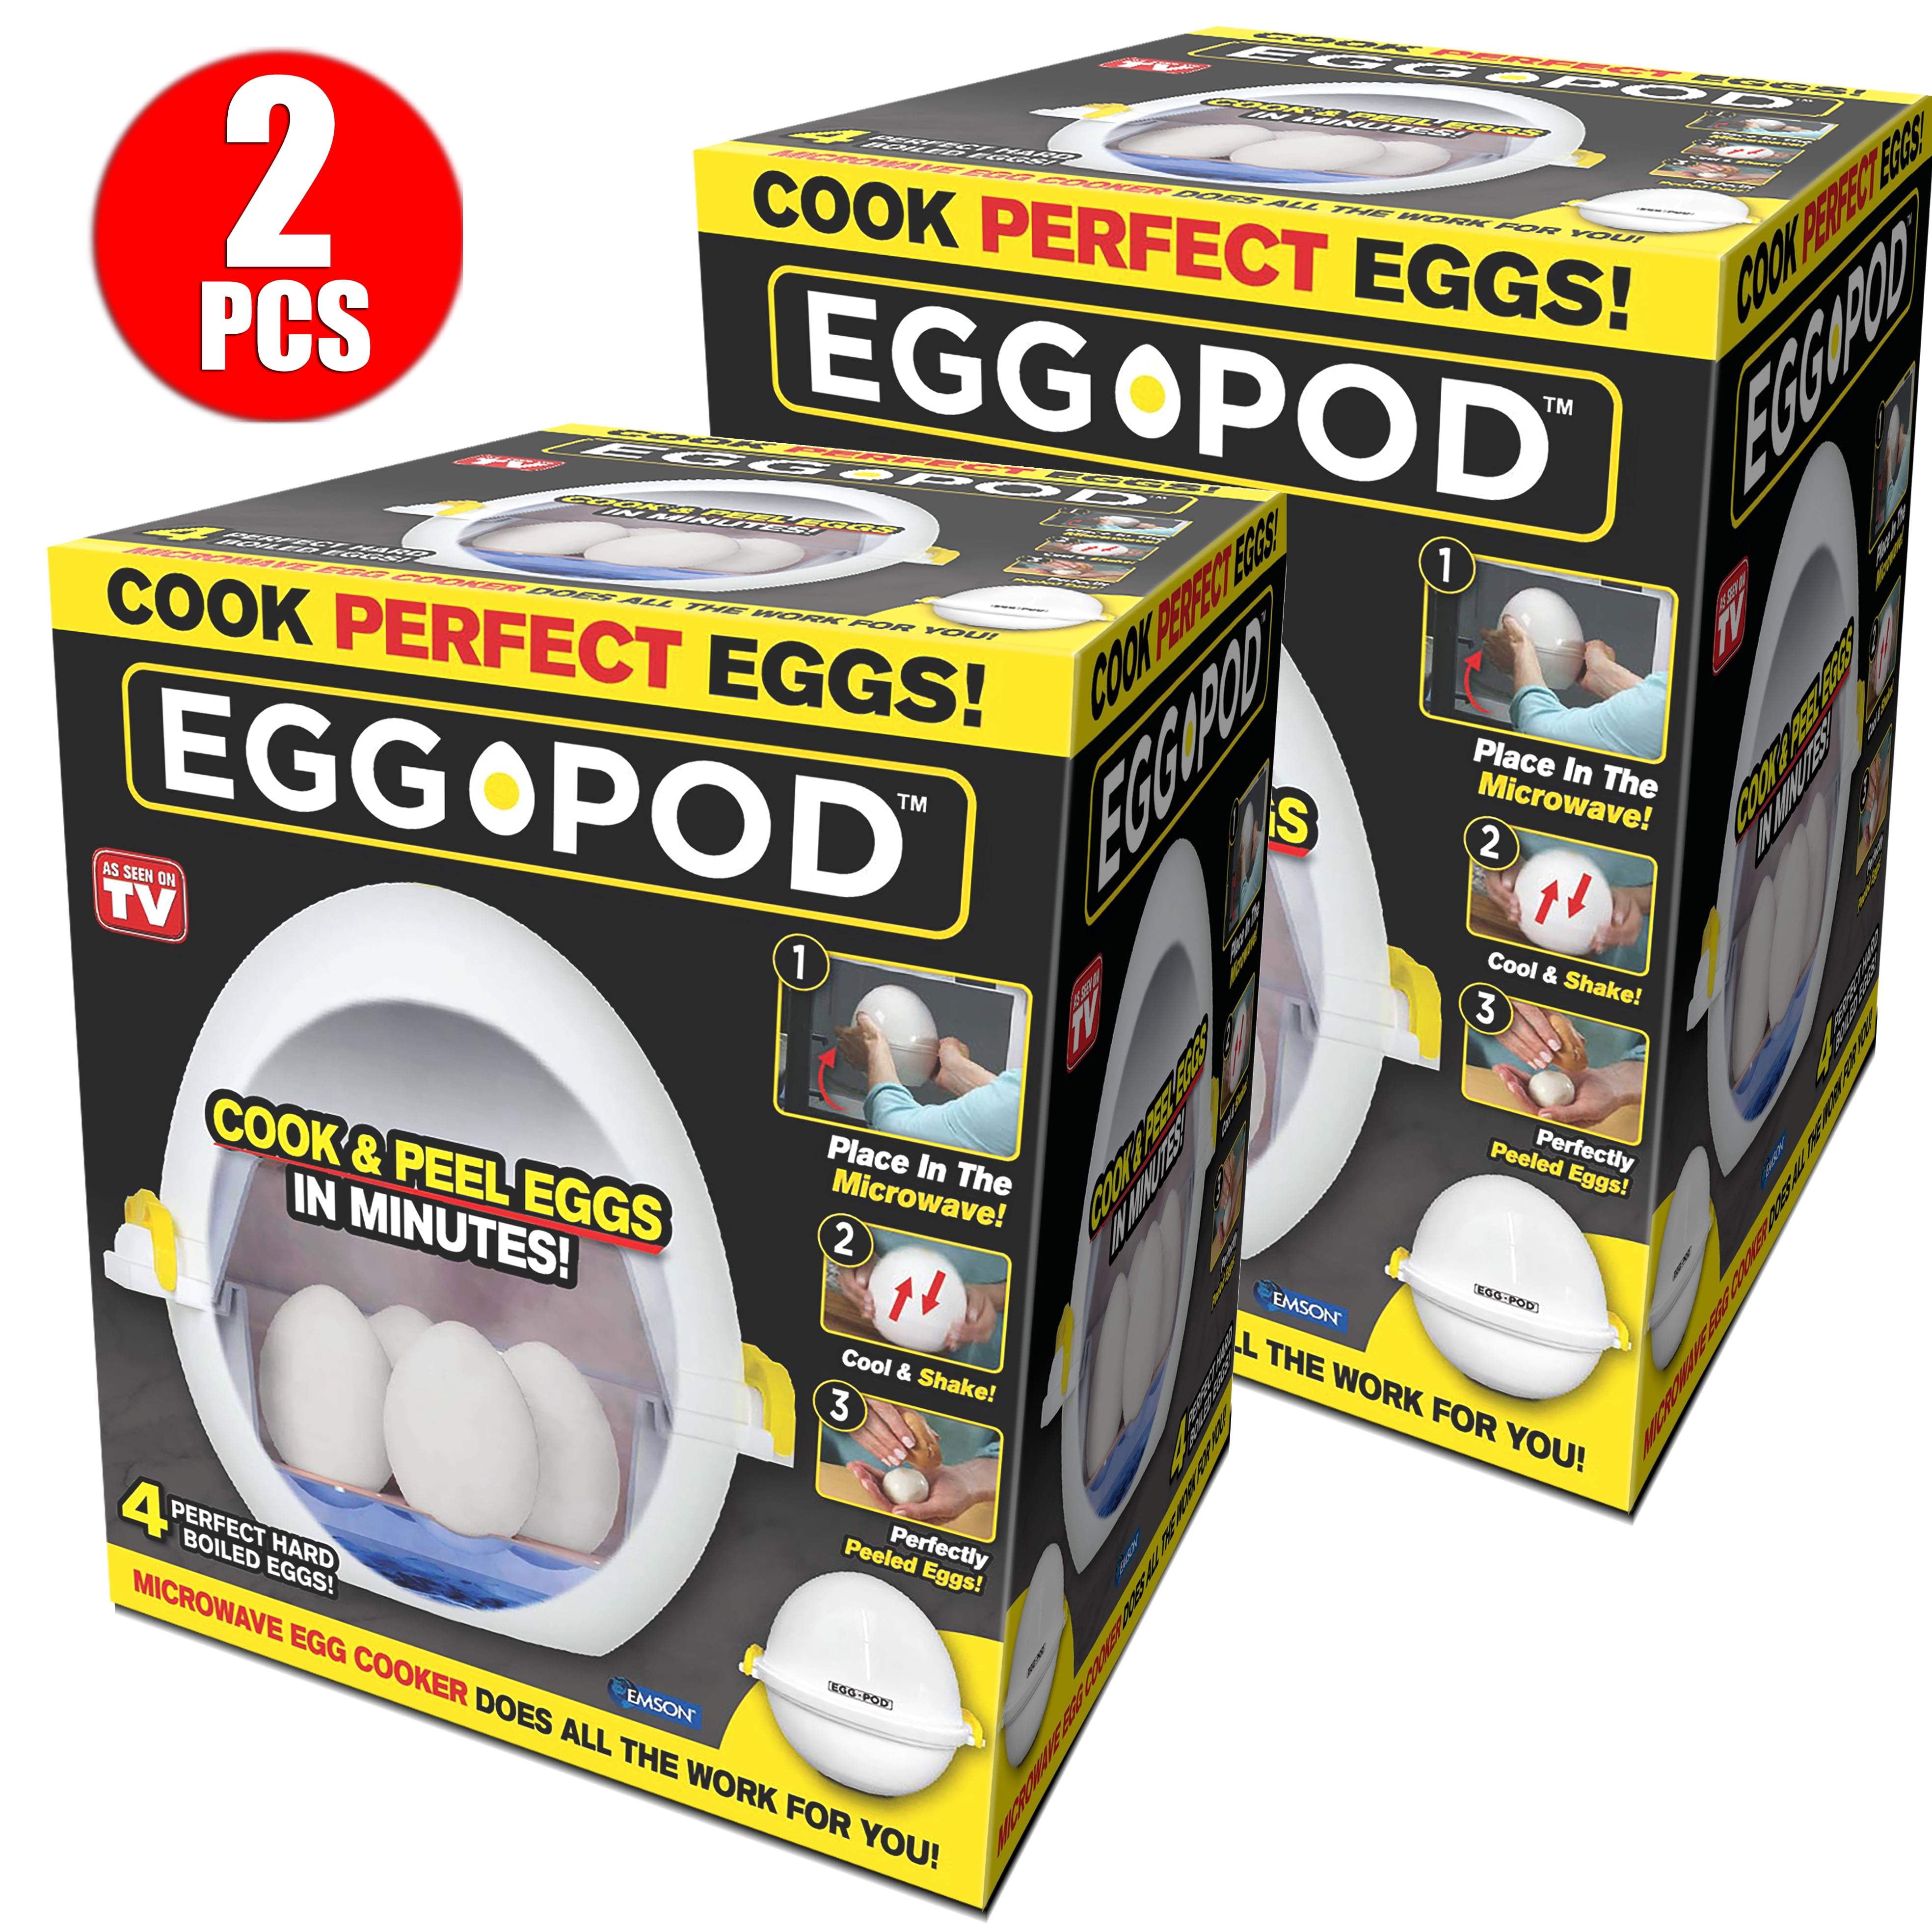 1 Pcs Microwave Egg Poacher Saves Time Eggs Made Easy No Mess Free Postages NEW